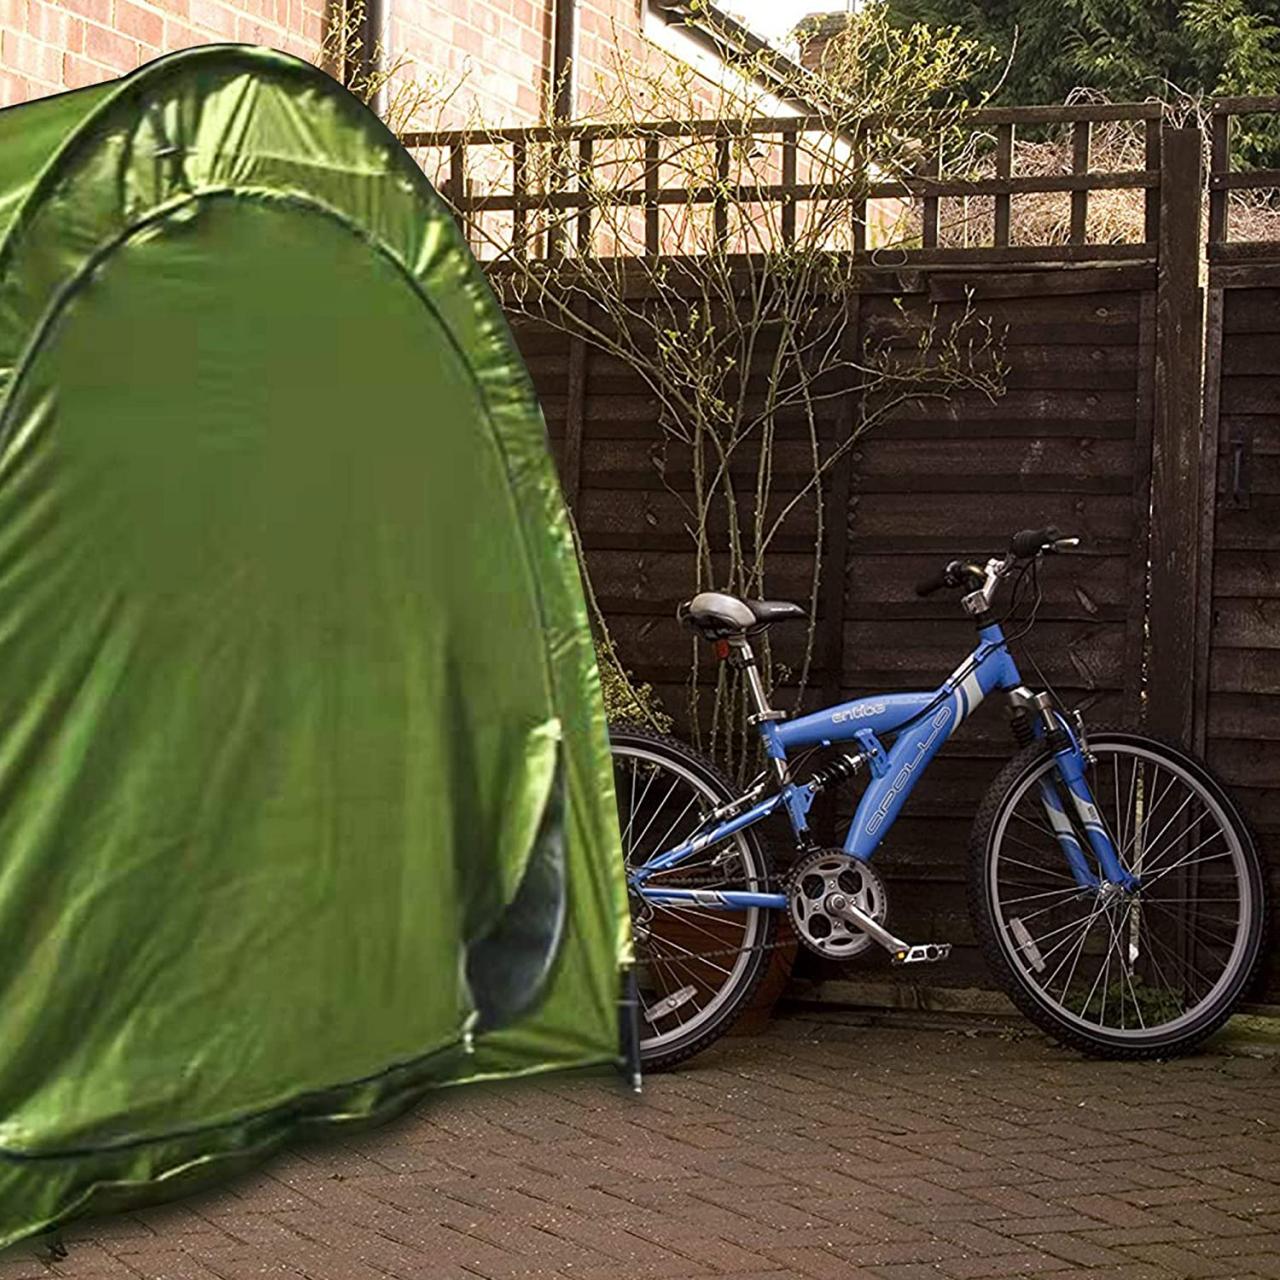 Buy Bike Shed Storage Bicycle Tent - Bicycle Storage Sheds Bike Covers  Outdoor Storage Waterproof - Bike Shelter Bicycle Cover 210D Oxford Fabric  Outdoor Storage Clearance Online in Indonesia. B09245TDFT